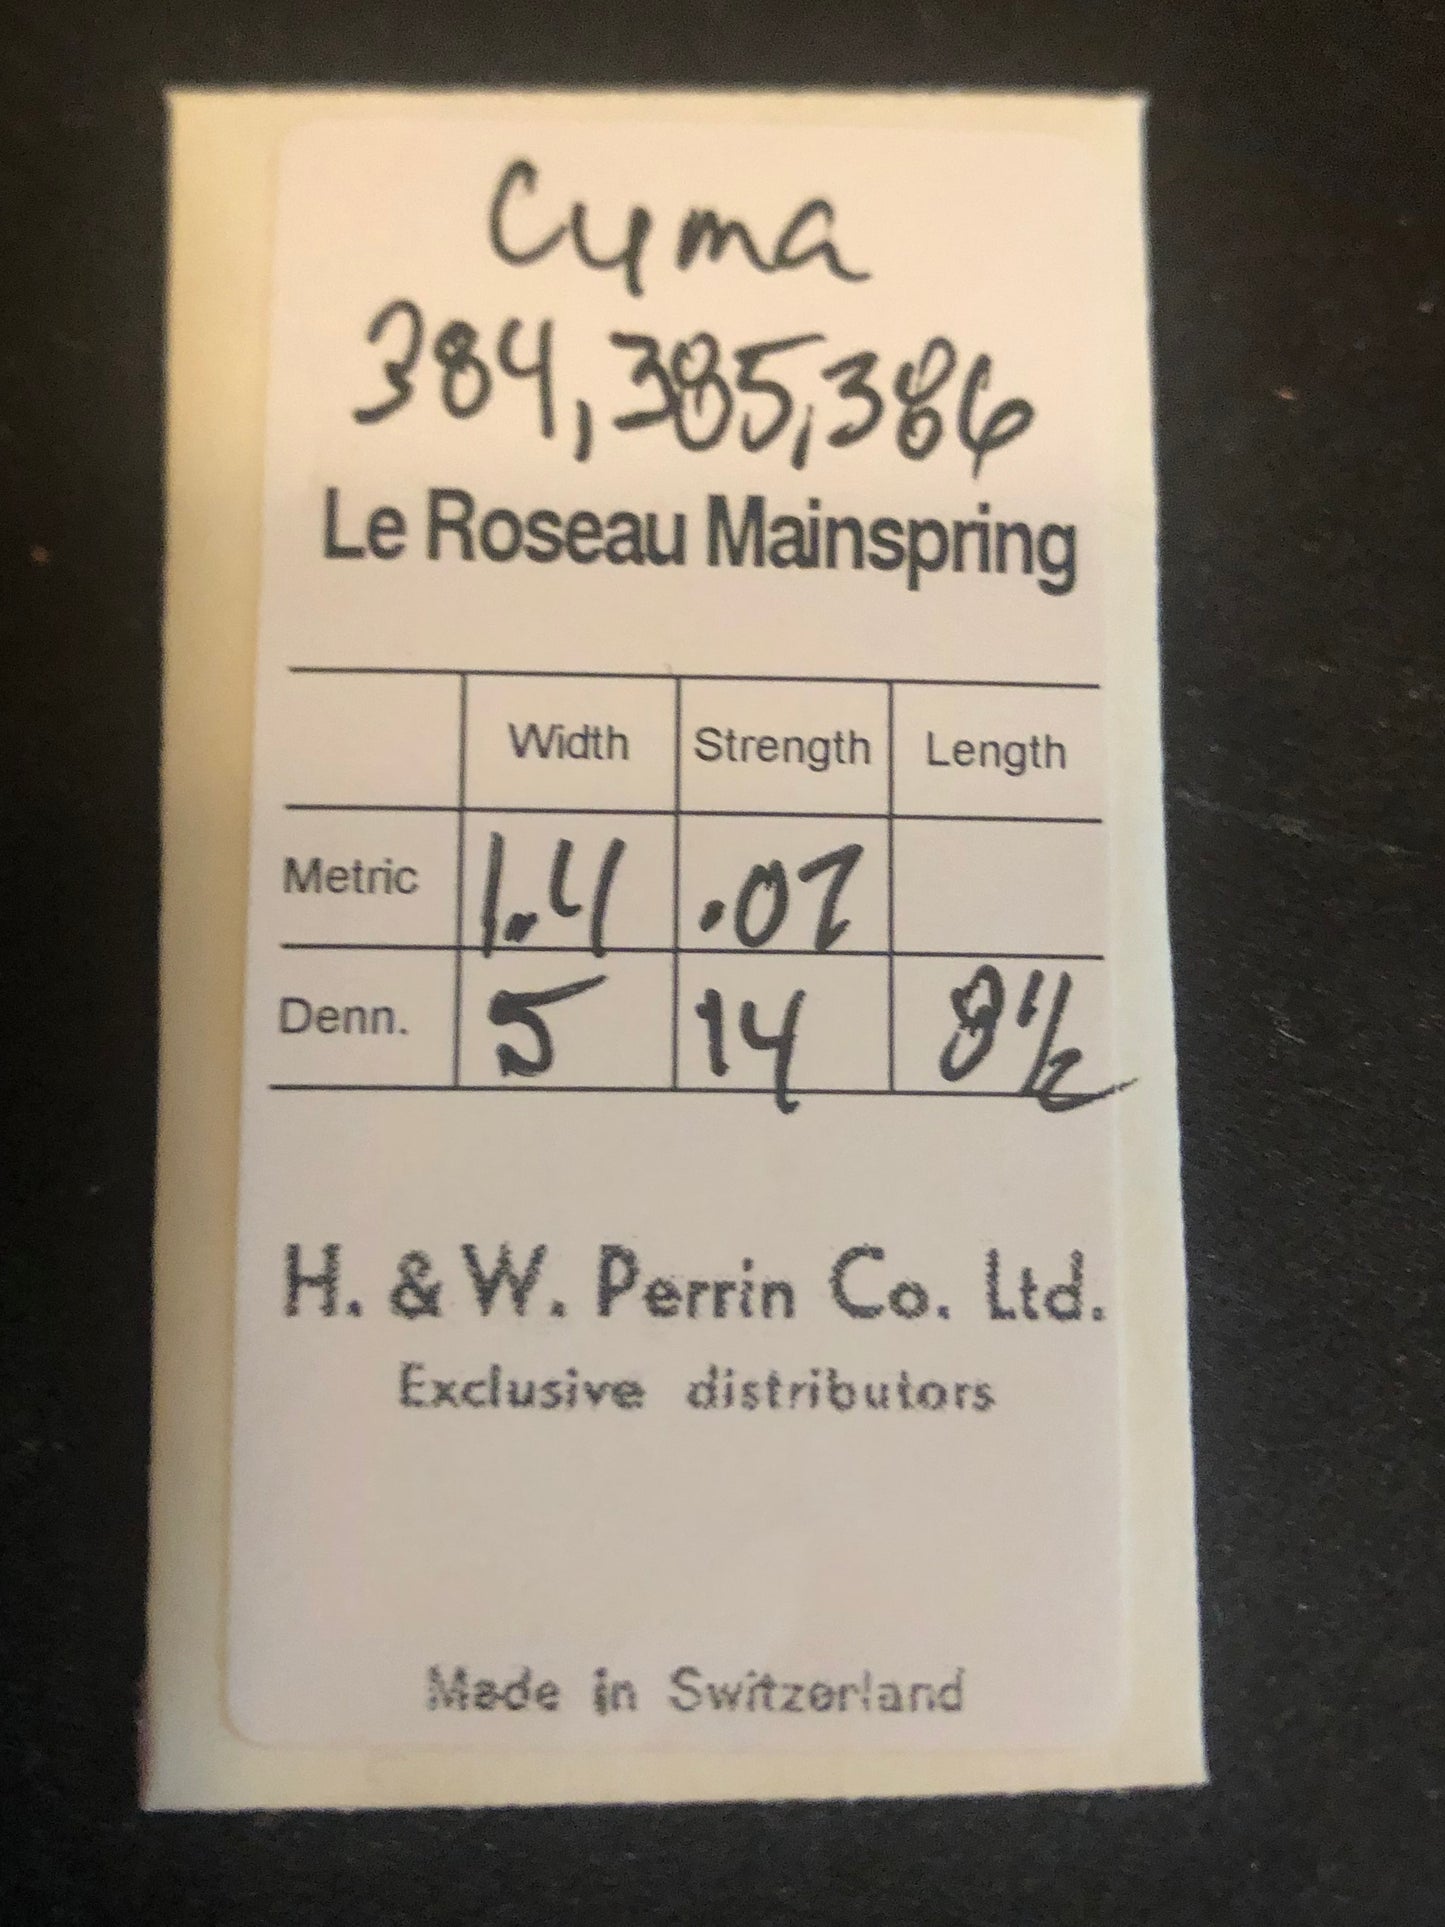 H. & W. Perrin Co. Mainspring for Cyma / Tavannes 384, 385, 386 - Steel